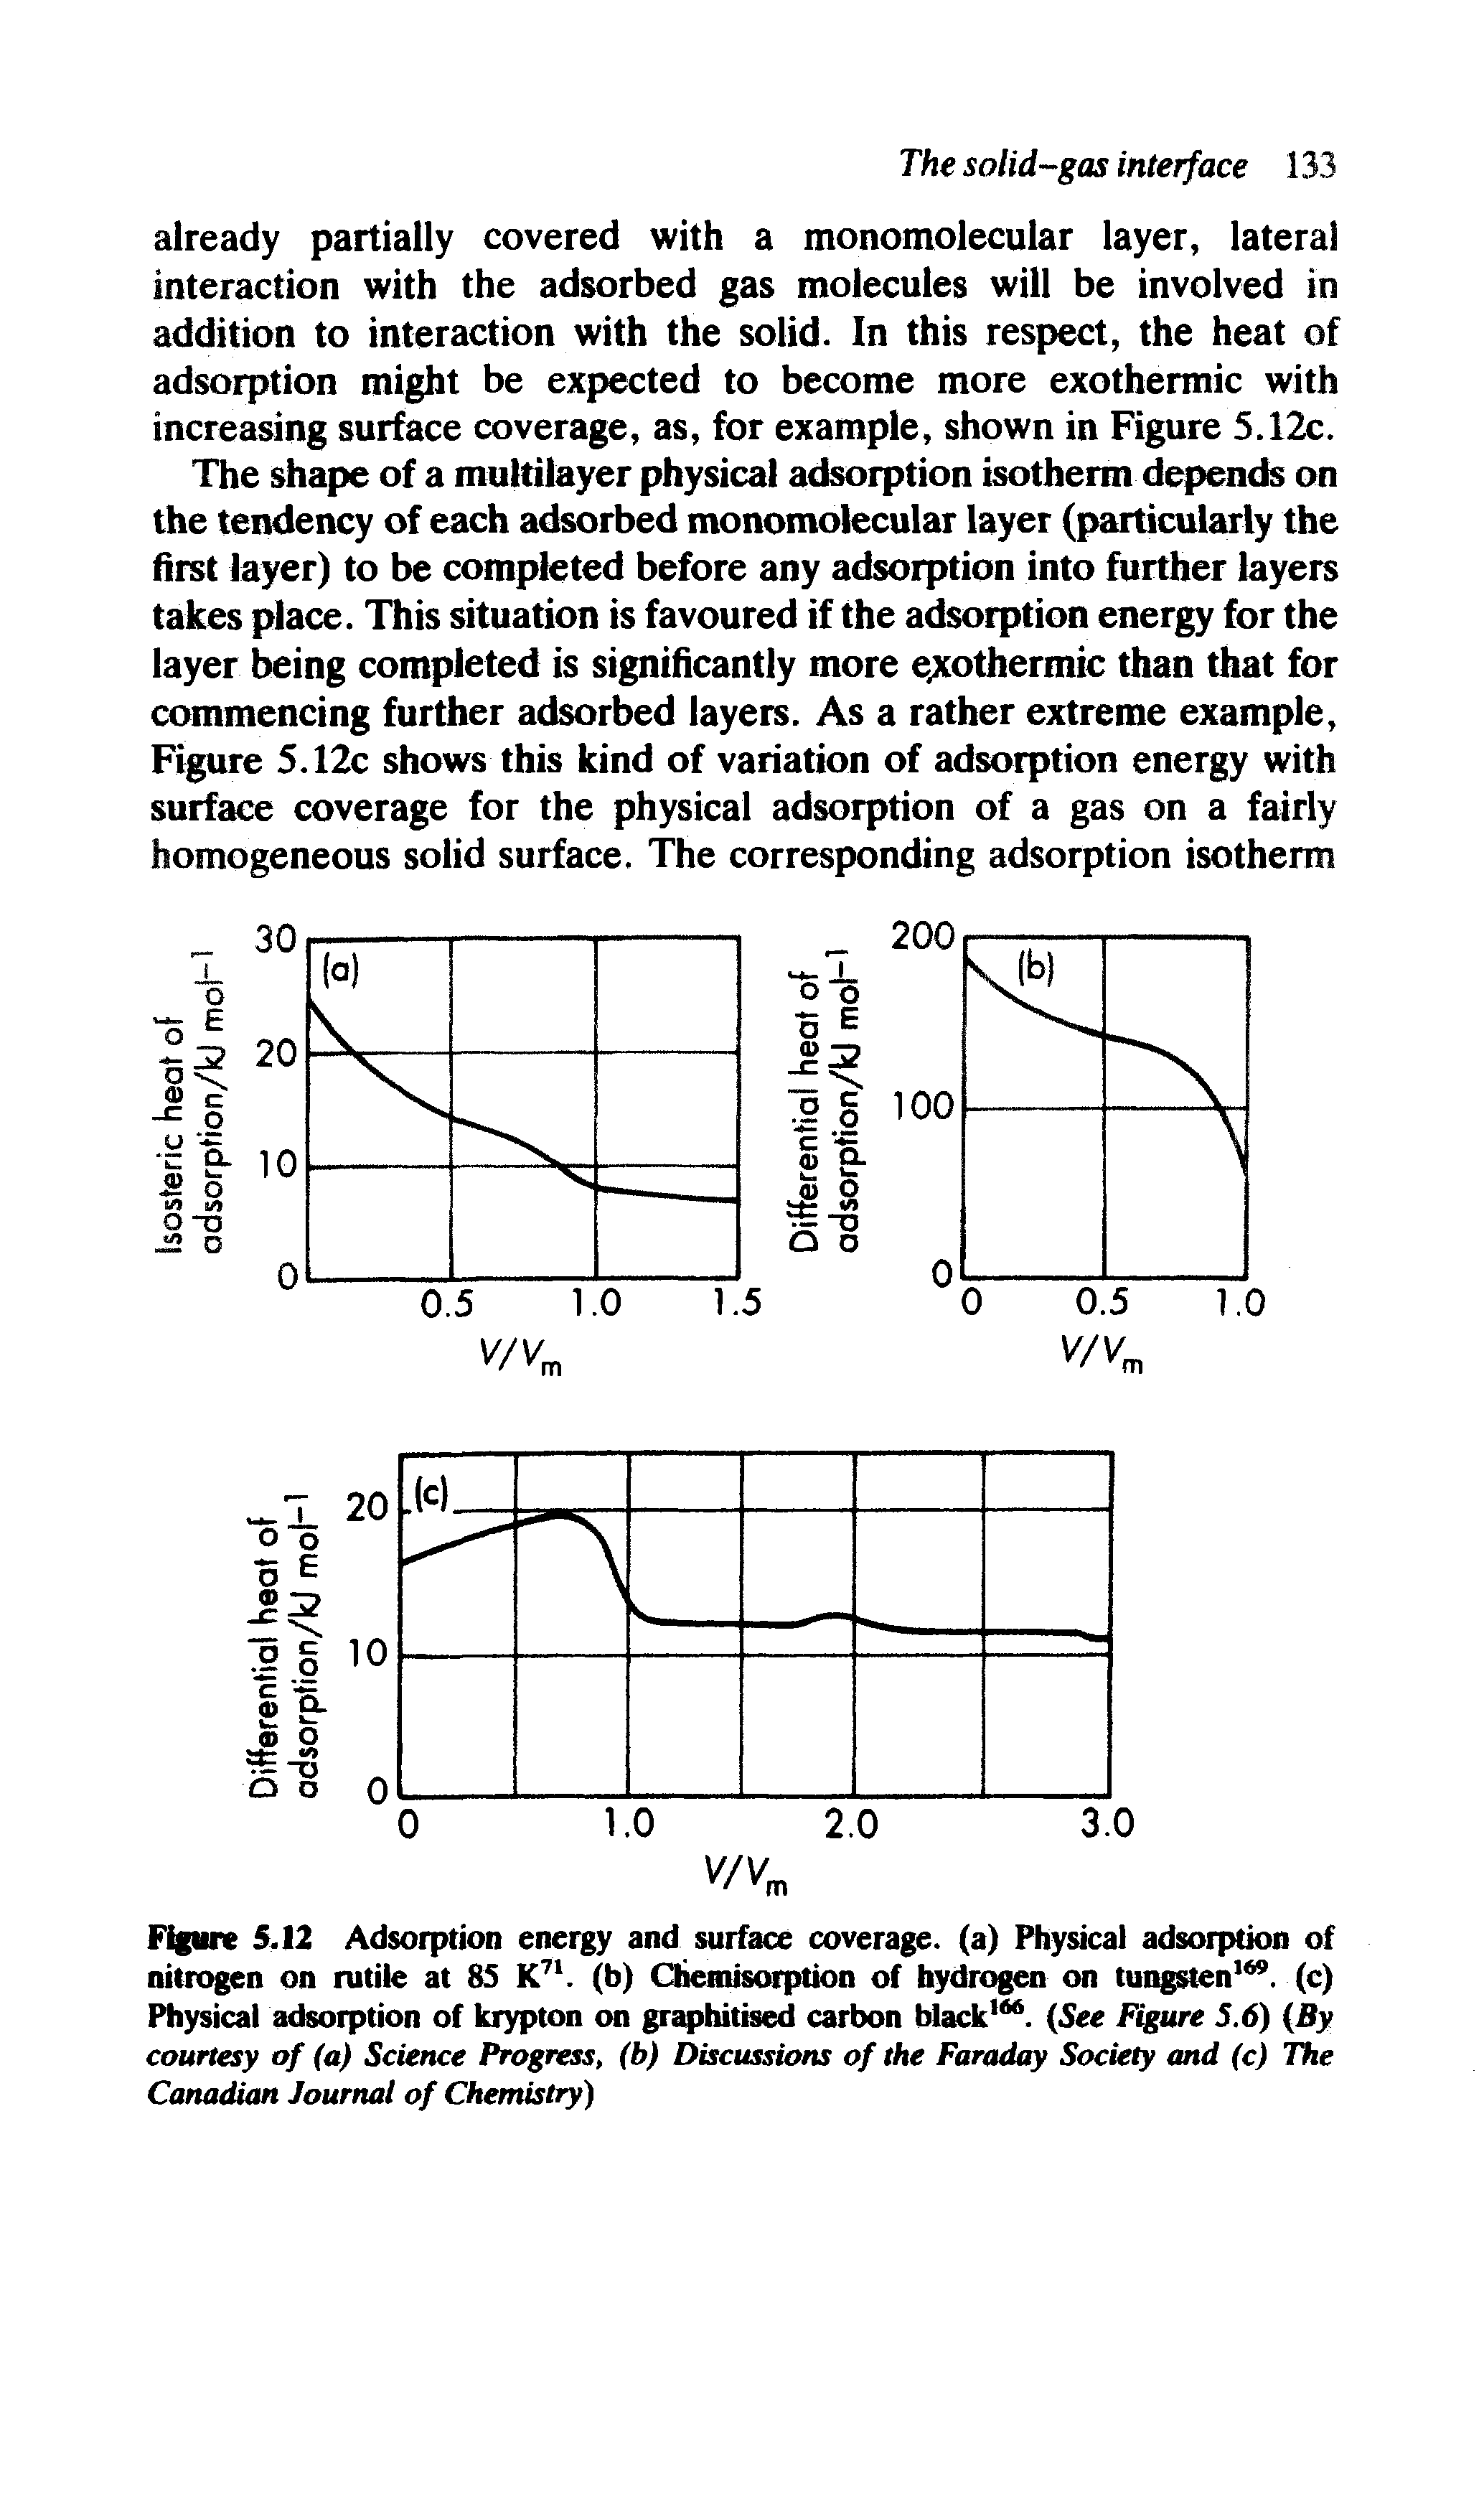 Figure 5.12 Adsorption energy and surface coverage, (a) Physical adsorption of nitrogen on rutile at 85 K71. (b) Chemisorption of hydrogen on tungsten169, (c) Physical adsorption of krypton on graphitised carbon black166. (See Figure 5.6) (By courtesy of (a) Science Progress, (b) Discussions of the Faraday Society and (c) The Canadian Journal of Chemistry)...